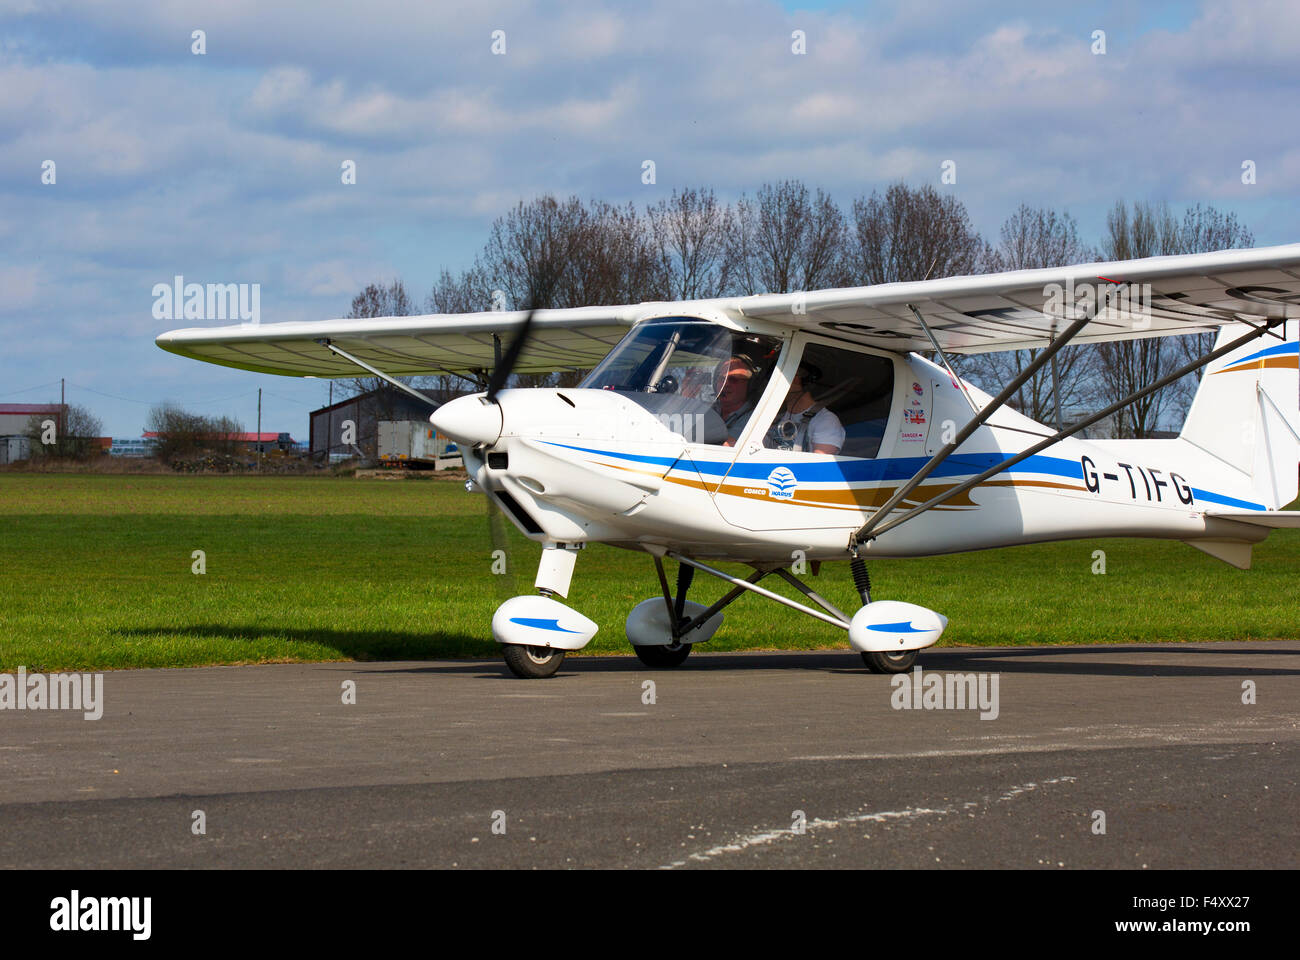 Ikarus C42 FB80 G-TIFG taxiing to runway at Breighton Airfield Stock Photo